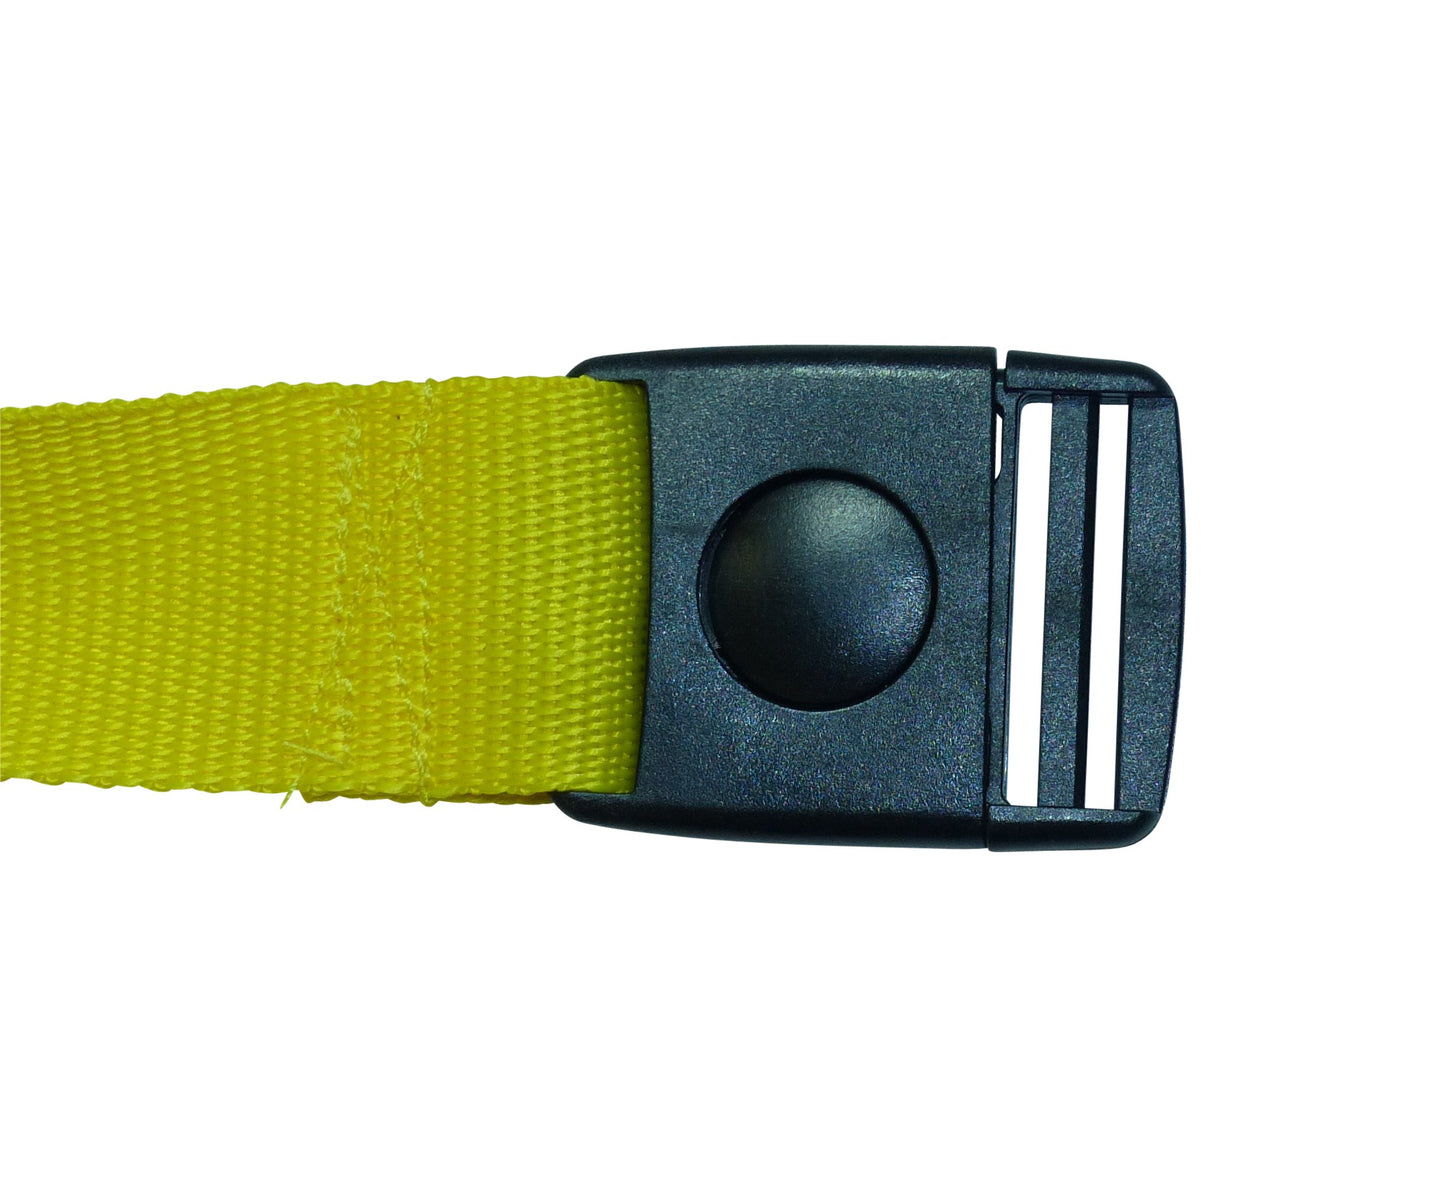 Benristraps 38mm button centre release buckle on webbing